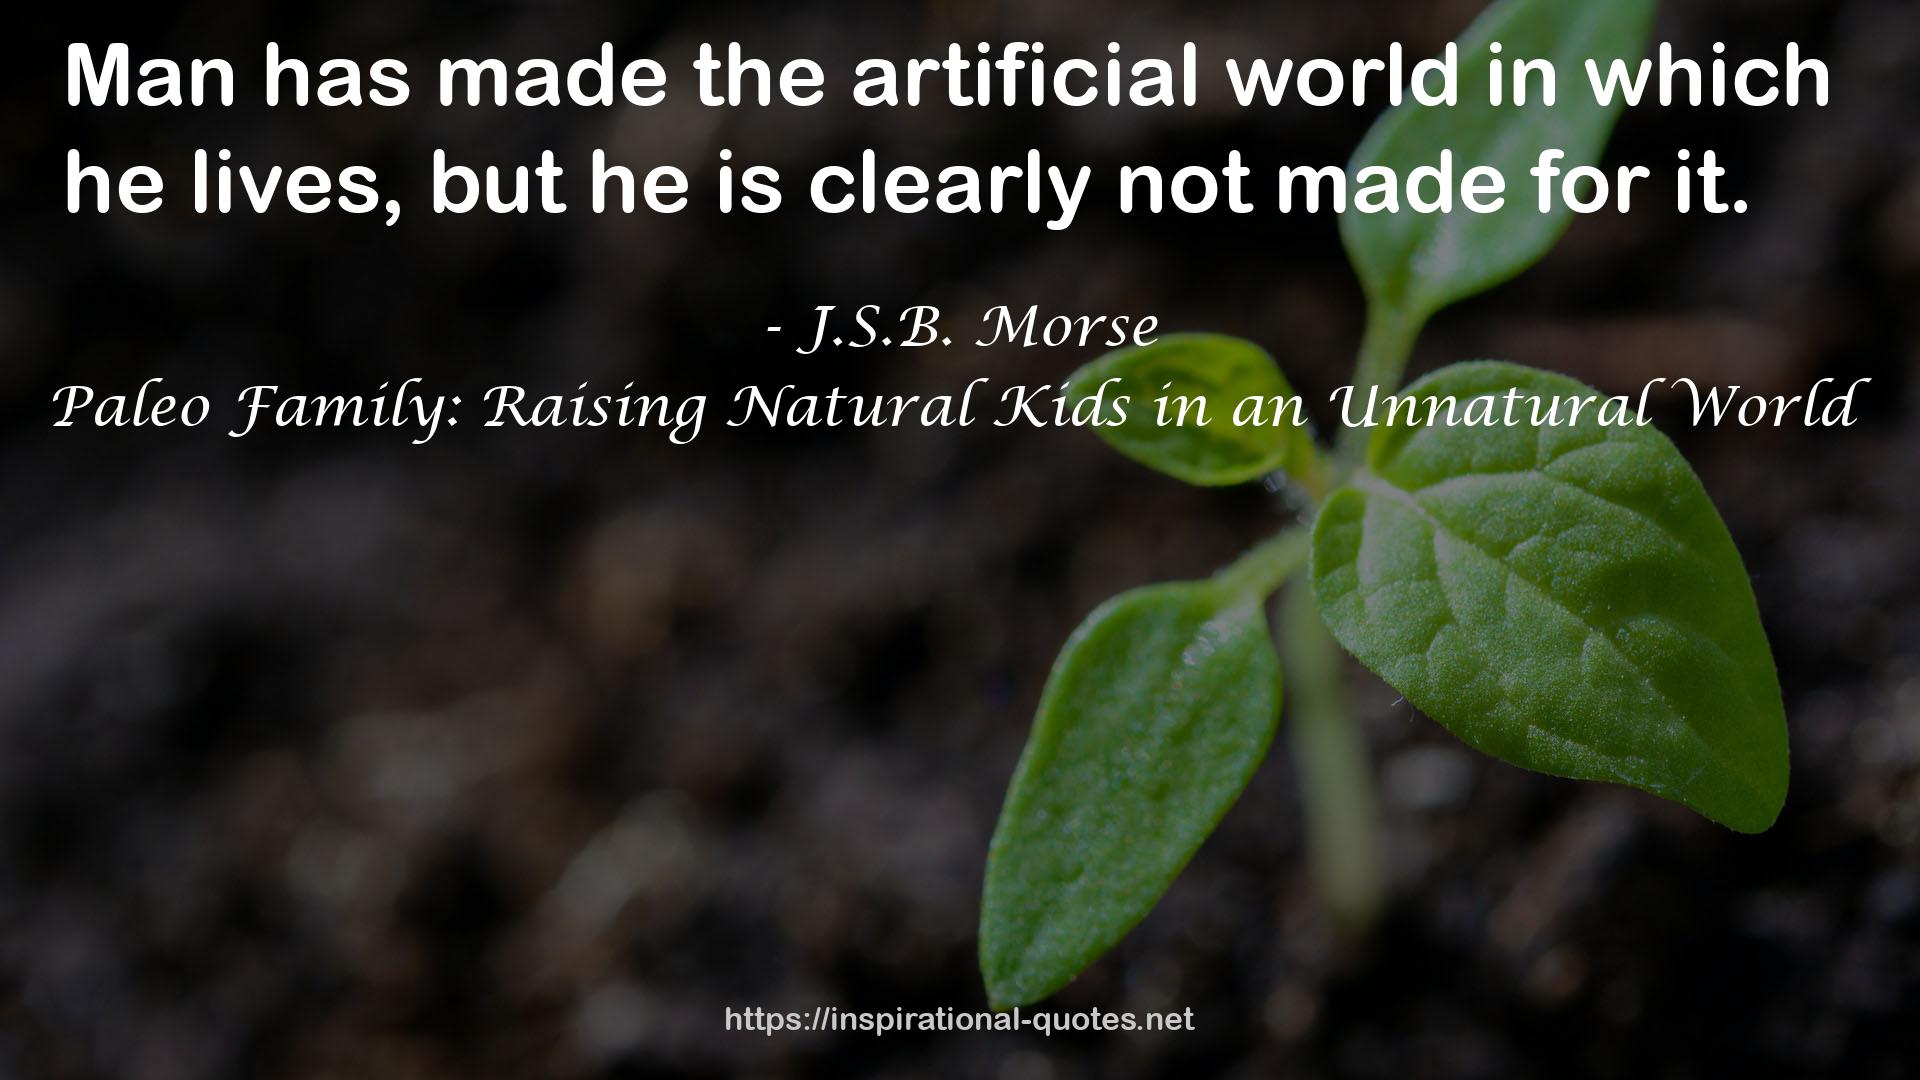 Paleo Family: Raising Natural Kids in an Unnatural World QUOTES